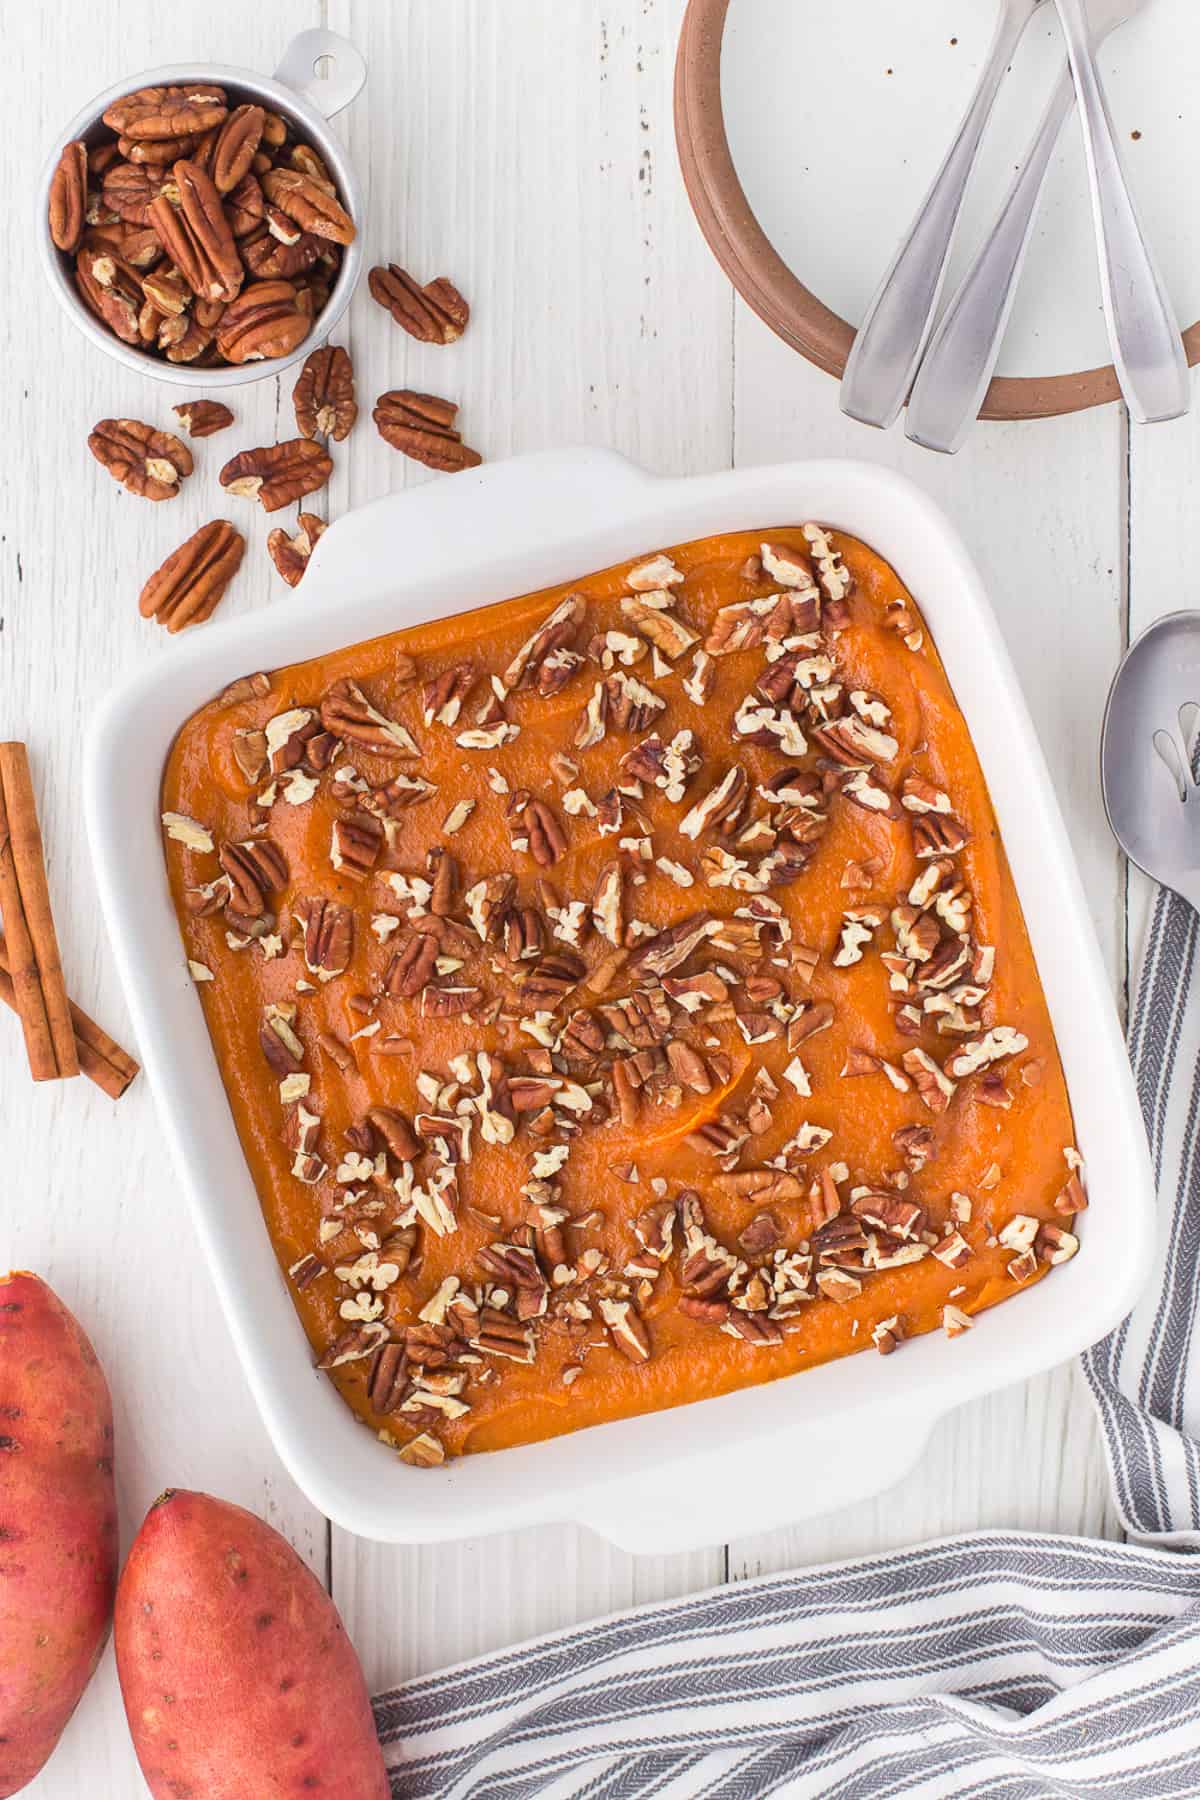 Sweet potato casserole - added pecans to top.